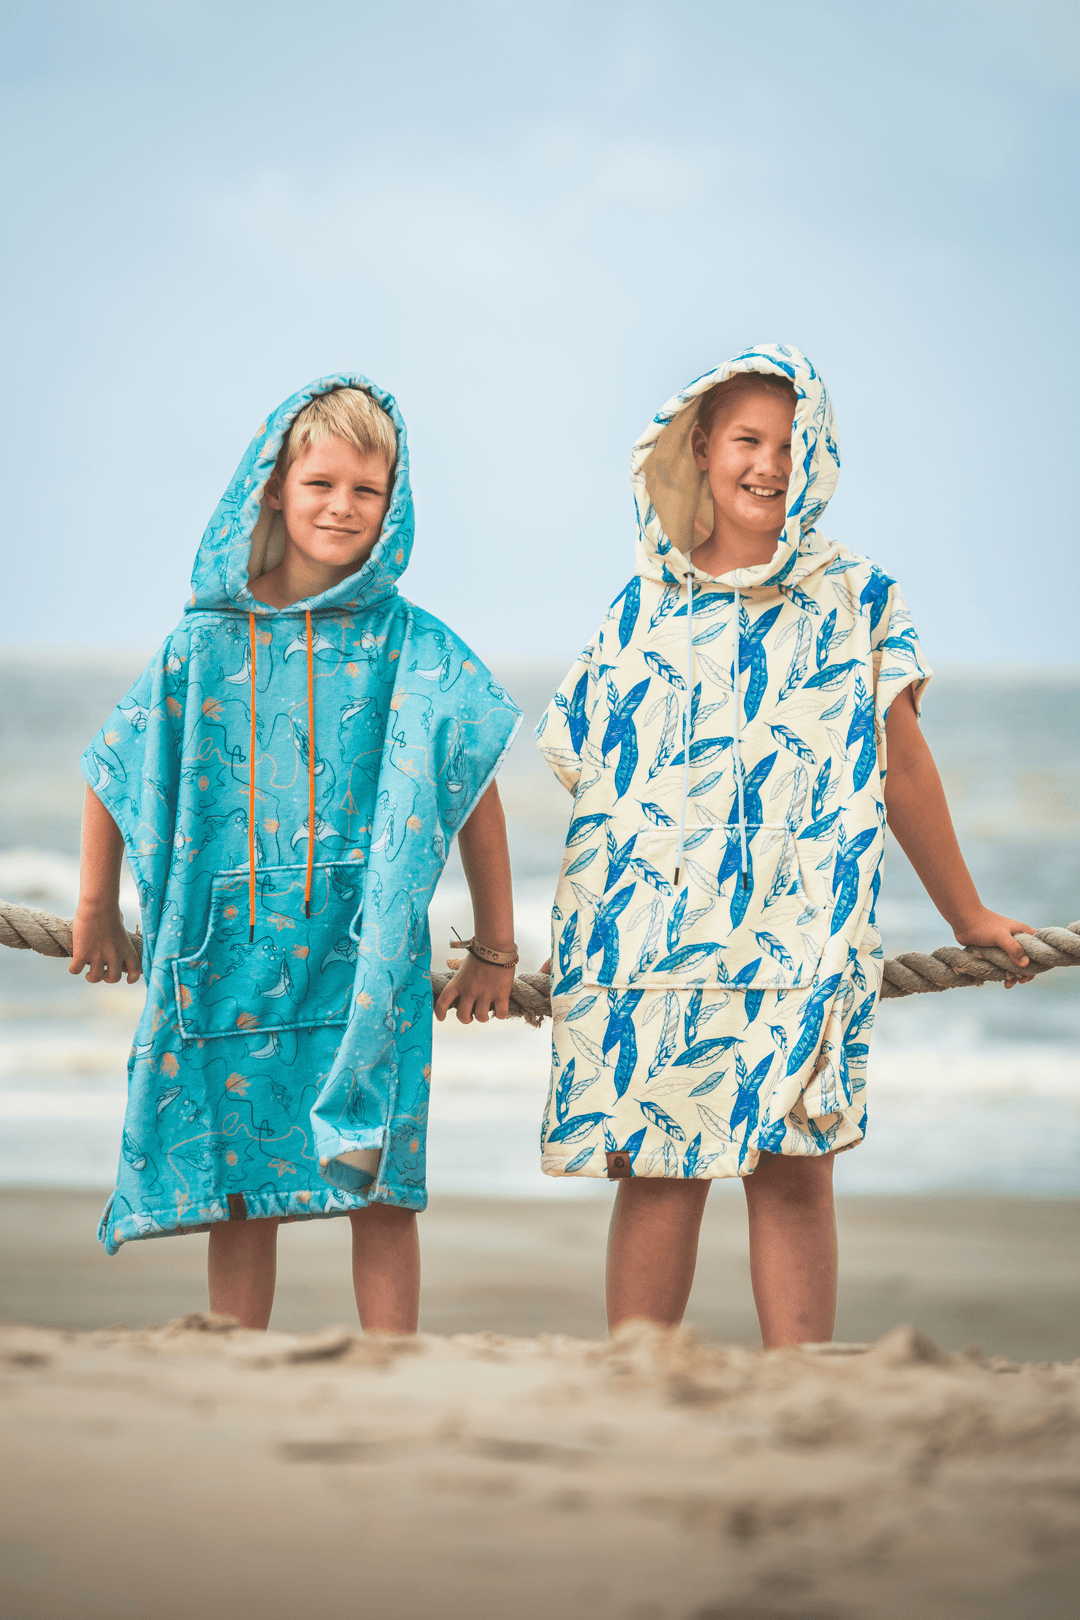 Our teen size has the same design as the adult, just a bit smaller. A changing towel is a must-have for teenagers to get warm and hang around after a day on the beach. Our oversized surf poncho allows them to change clothes in private. This nautical design will make them feel connected to the ocean whilst the soft and absorbent terry fabric keeps them warm and comfy.